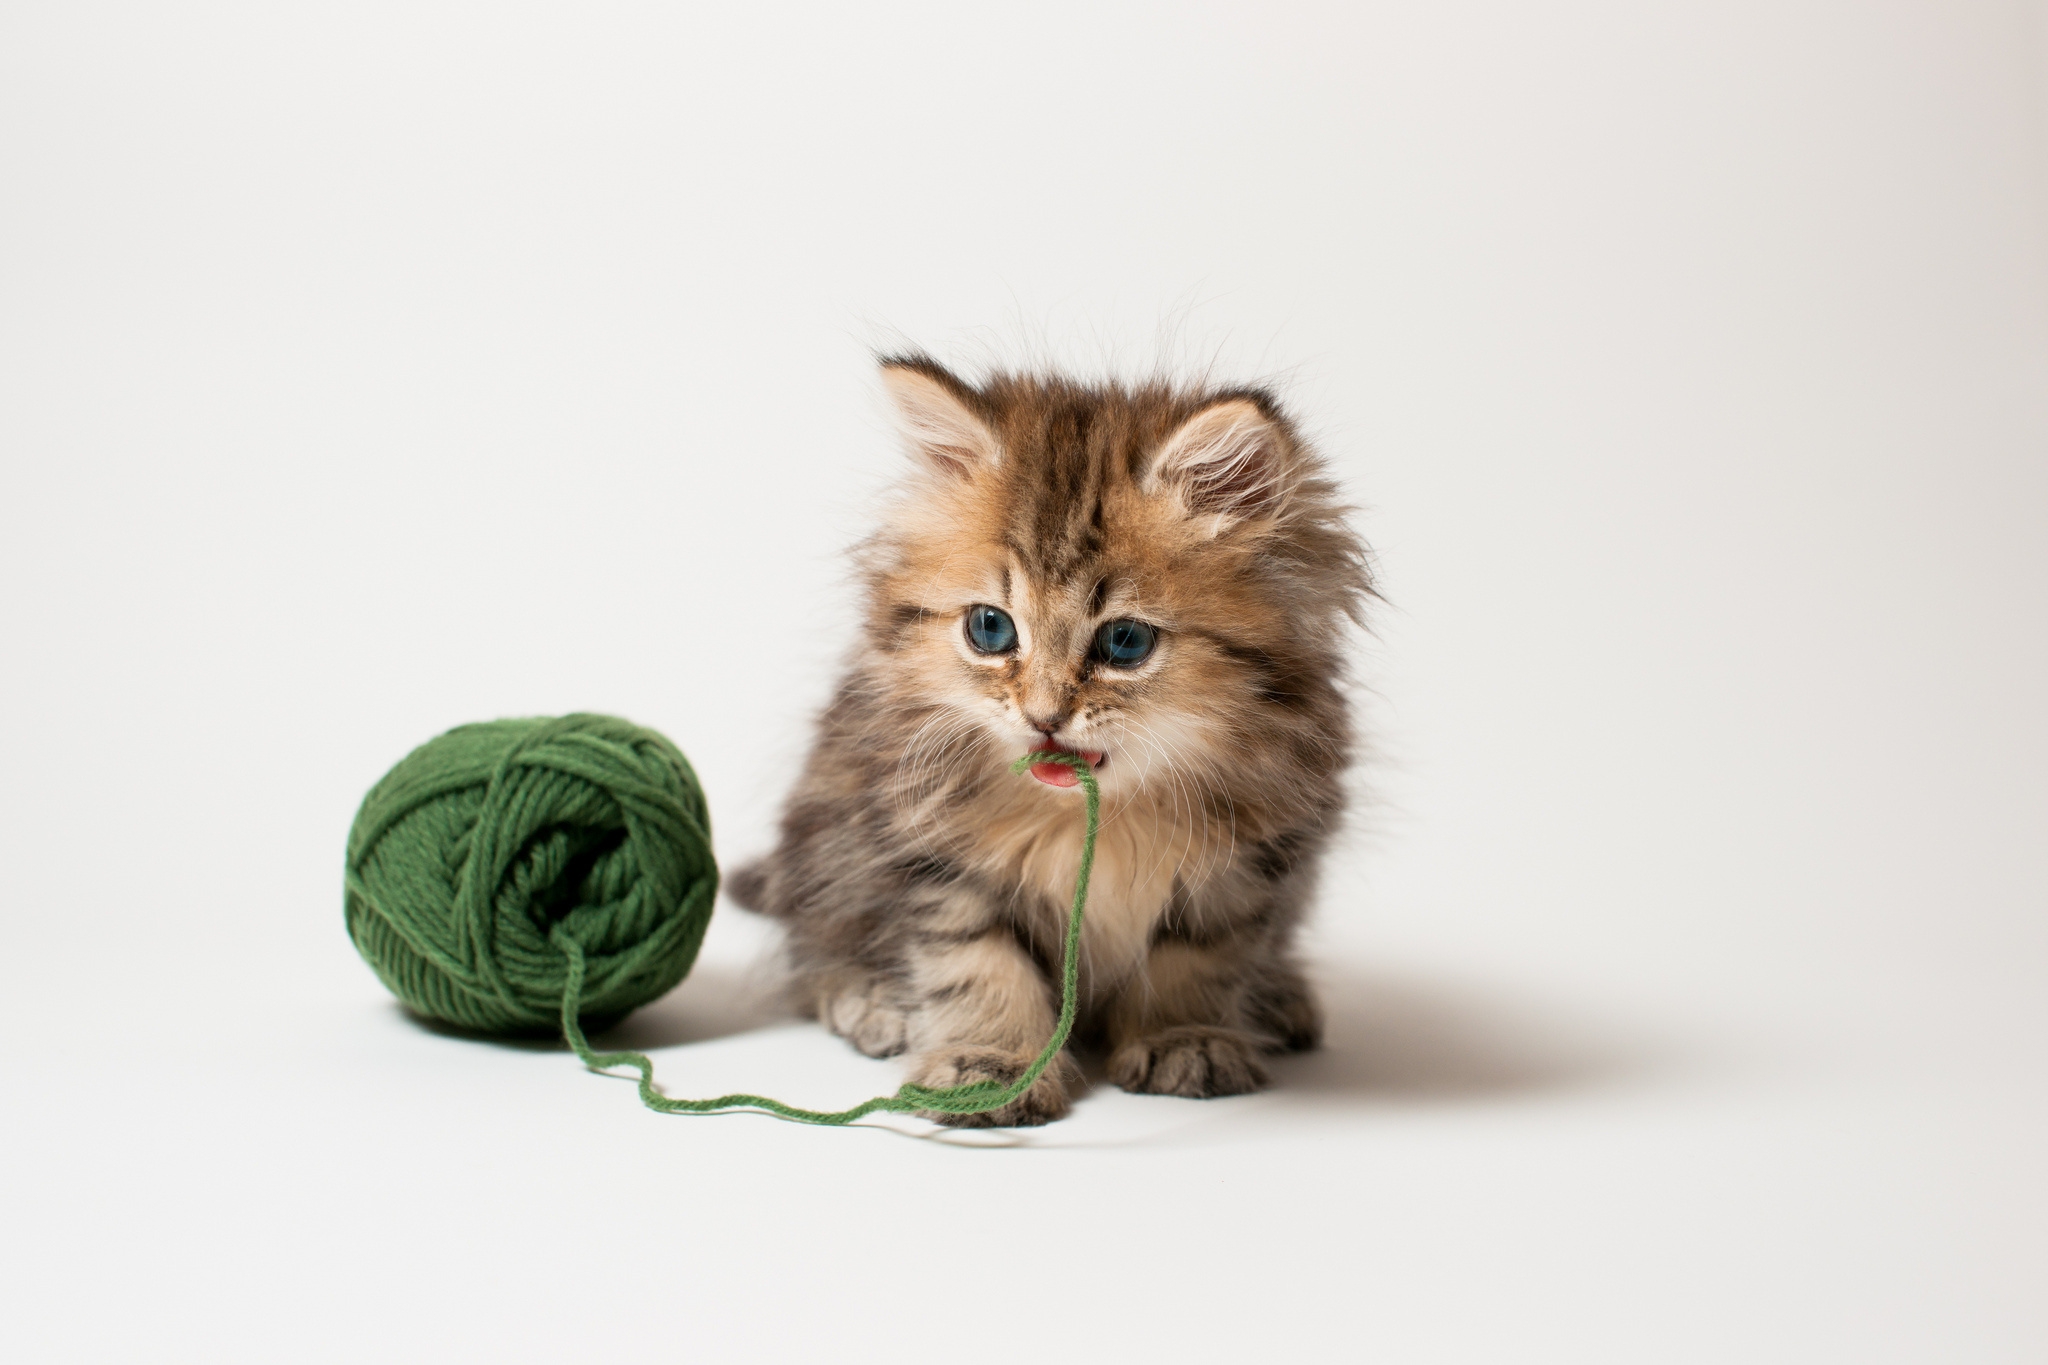 animals, fluffy, kitty, kitten, playful, threads, thread, kid, tot, clew lock screen backgrounds